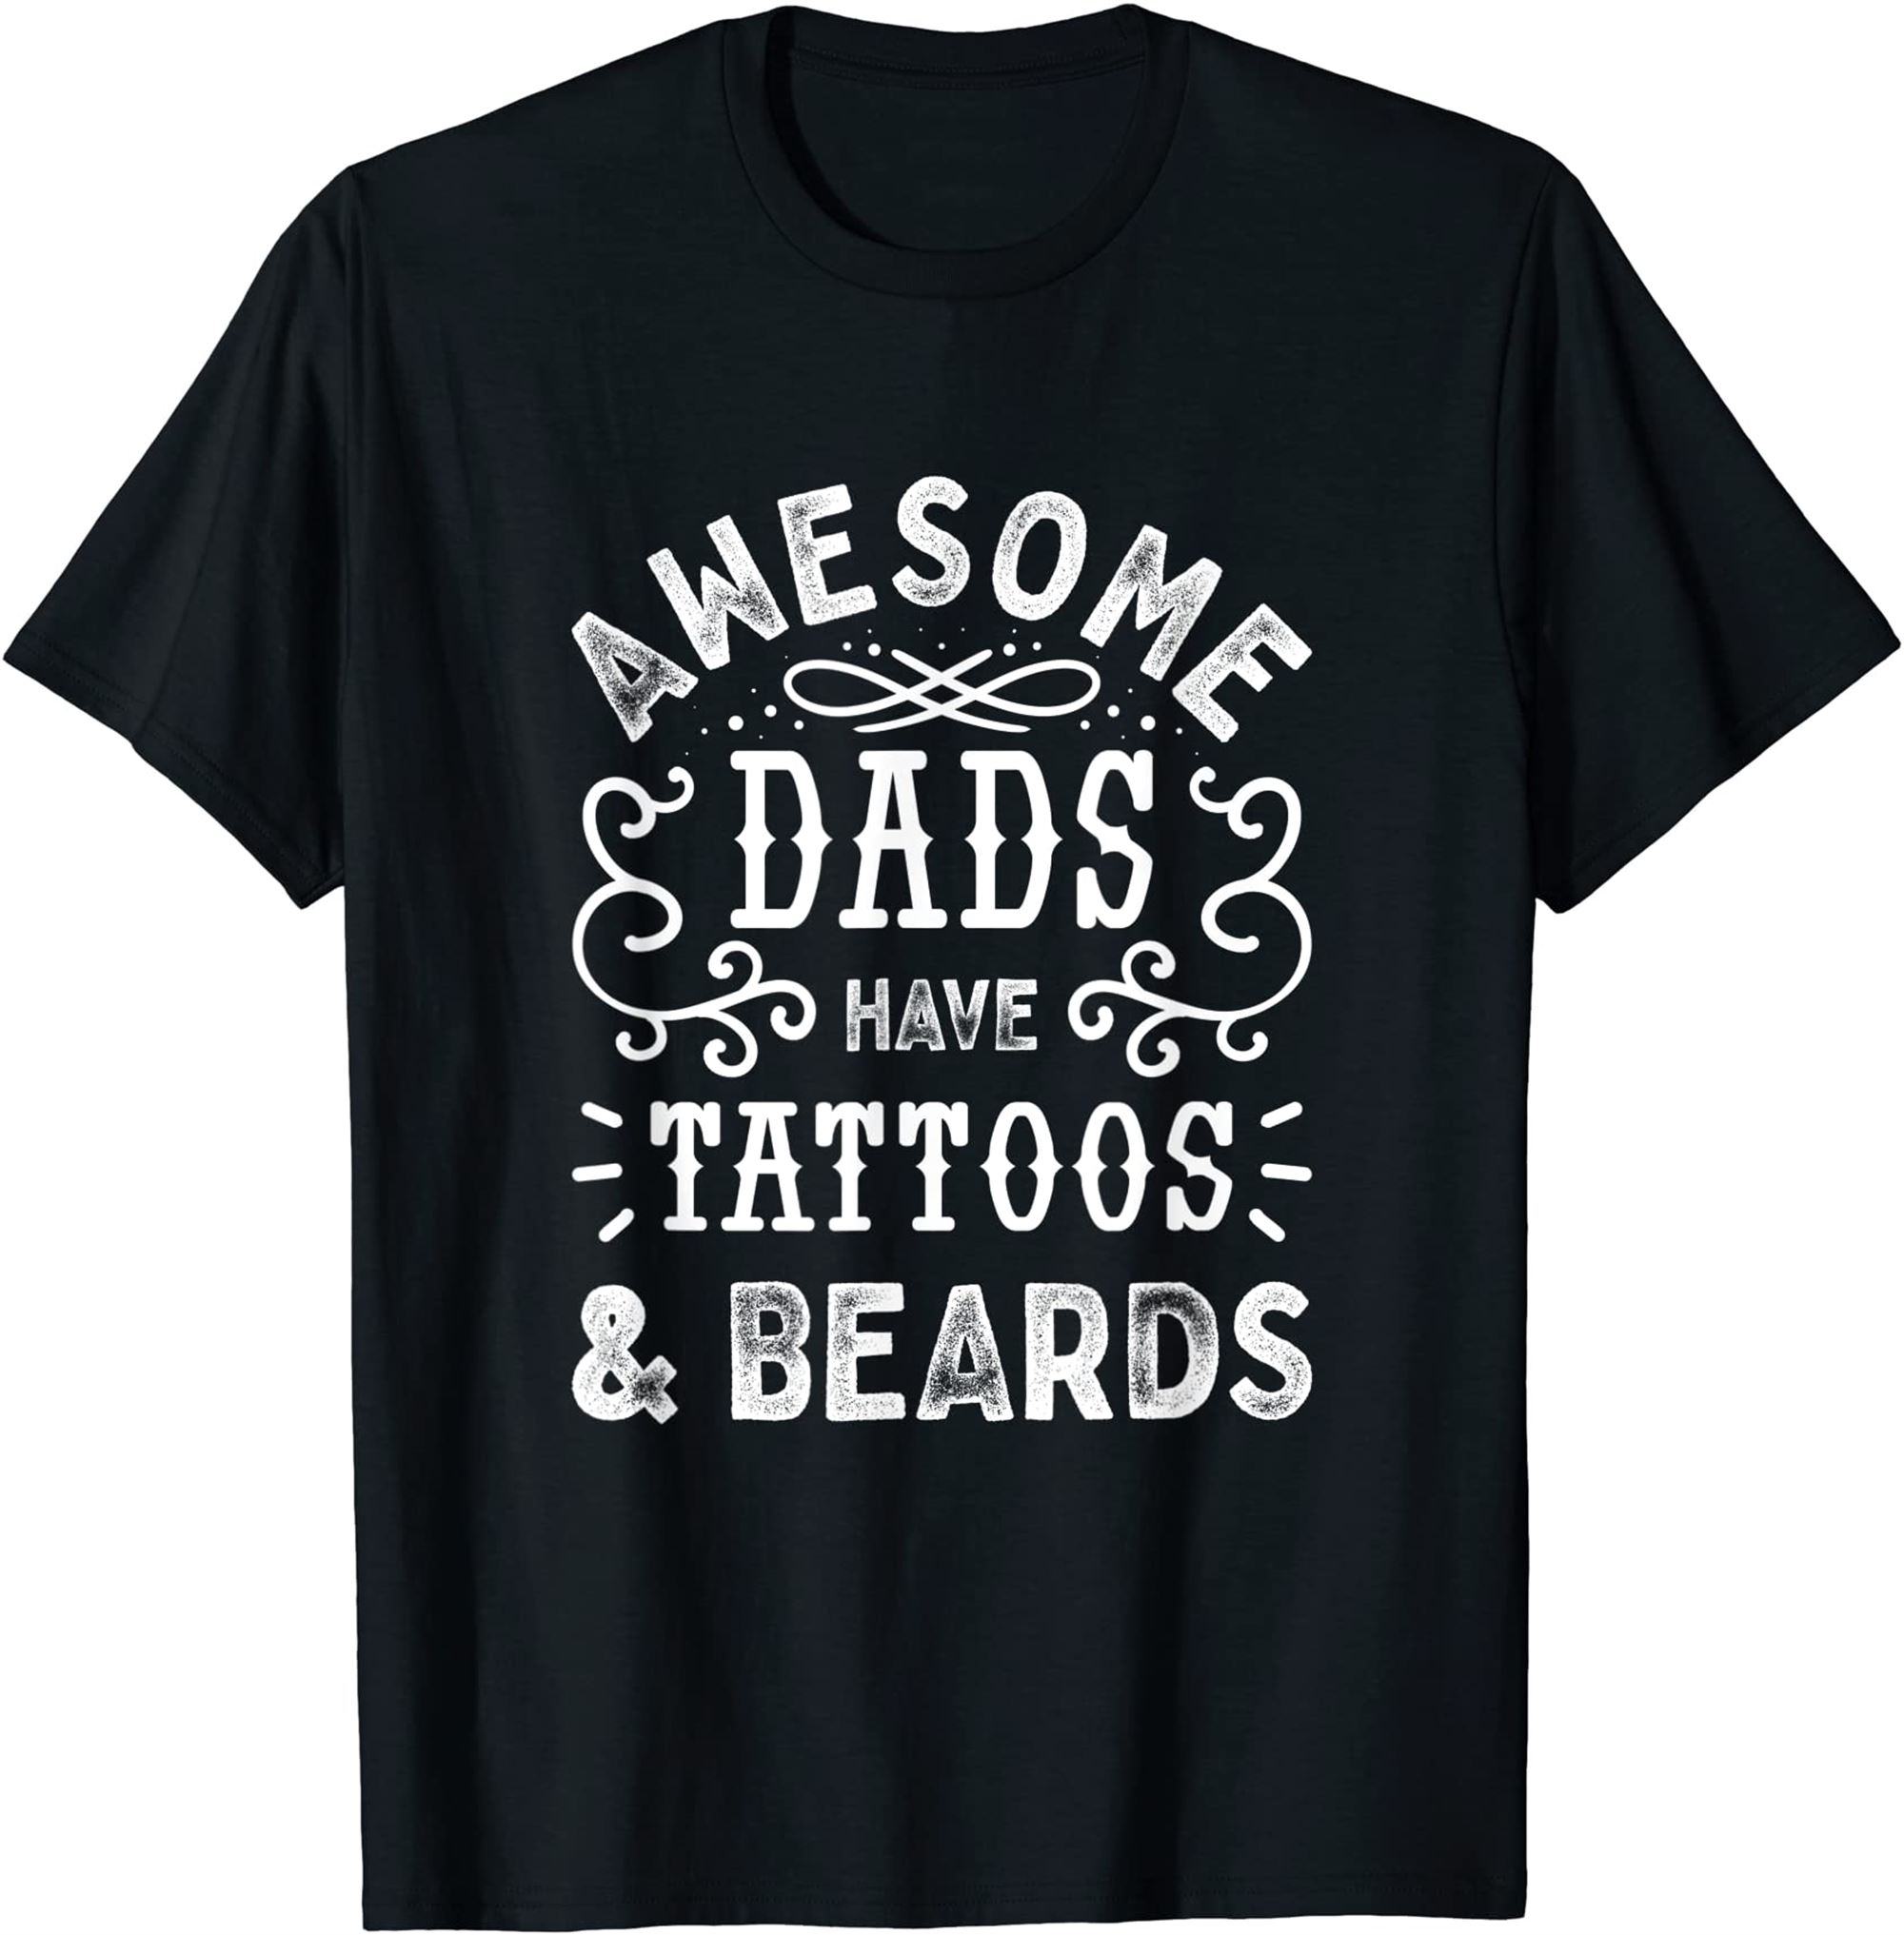 Mens Awesome Dads Have Tattoos And Beards Funny Fathers Day T-shirt Plus Size Up To 5xl